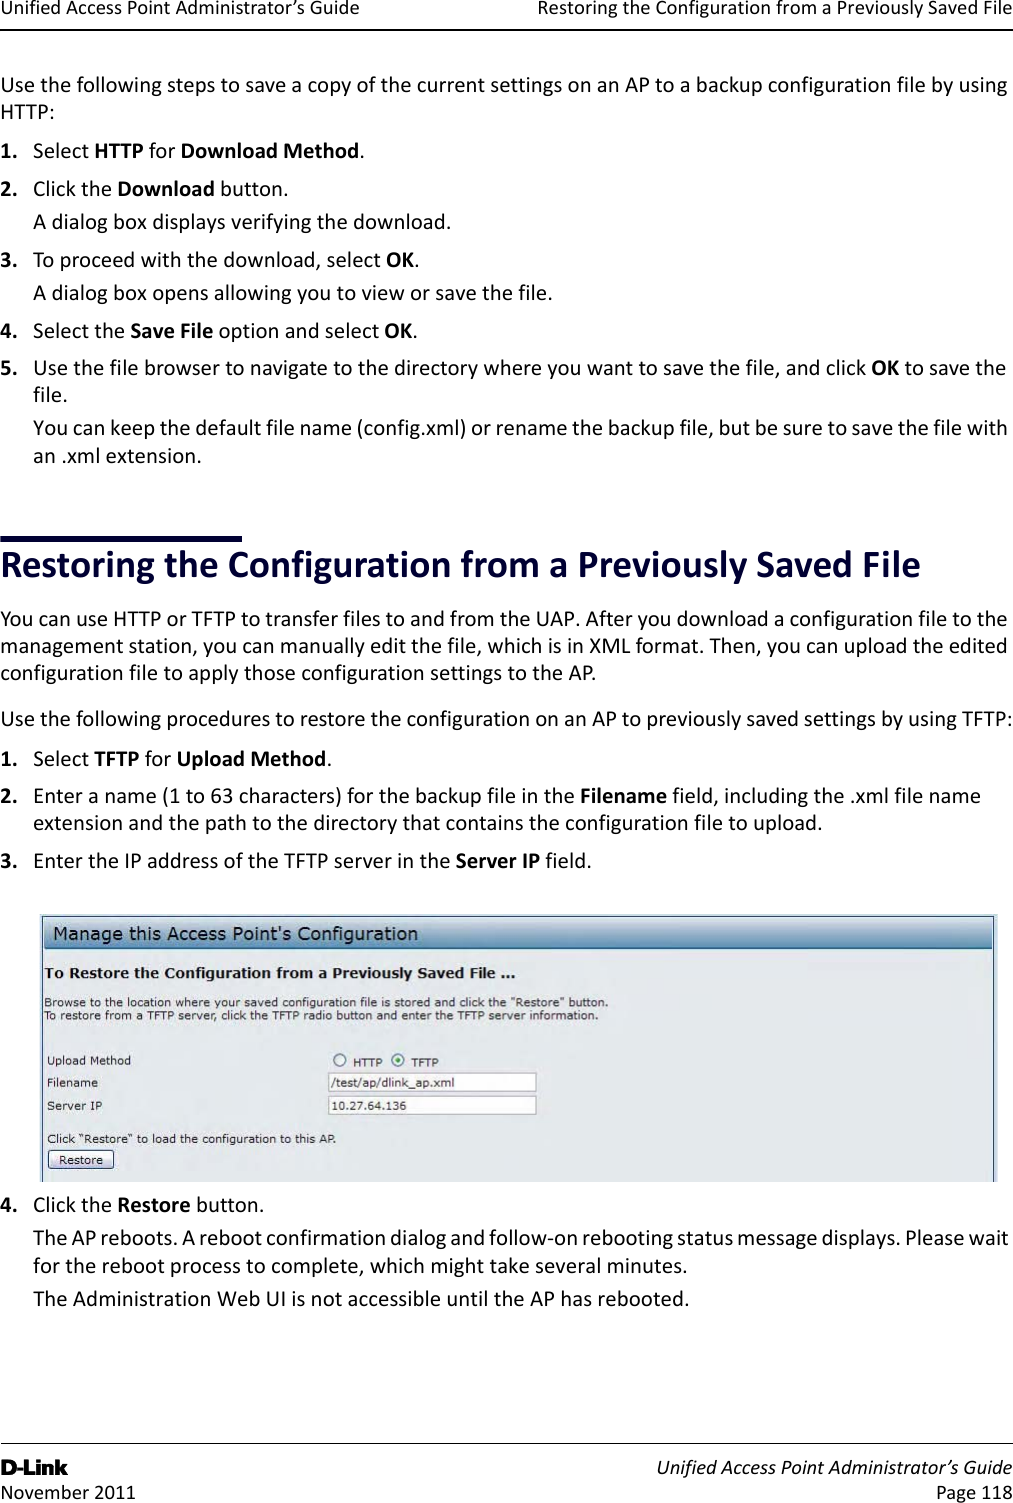 RestoringtheConfigurationfromaPreviouslySavedFileD-Link UnifiedAccessPointAdministrator’sGuide November2011 Page118UnifiedAccessPointAdministrator’sGuideUsethefollowingstepstosaveacopyofthecurrentsettingsonanAPtoabackupconfigurationfilebyusingHTTP:1. SelectHTTPforDownloadMethod.2. ClicktheDownloadbutton.Adialogboxdisplaysverifyingthedownload.3. Toproceedwiththedownload,selectOK.Adialogboxopensallowingyoutovieworsavethefile.4. SelecttheSaveFileoptionandselectOK.5. Usethefilebrowsertonavigatetothedirectorywhereyouwanttosavethefile,andclickOKtosavethefile.Youcankeepthedefaultfilename(config.xml)orrenamethebackupfile,butbesuretosavethefilewithan.xmlextension.RestoringtheConfigurationfromaPreviouslySavedFileYoucanuseHTTPorTFTPtotransferfilestoandfromtheUAP.Afteryoudownloadaconfigurationfiletothemanagementstation,youcanmanuallyeditthefile,whichisinXMLformat.Then,youcanuploadtheeditedconfigurationfiletoapplythoseconfigurationsettingstotheAP.UsethefollowingprocedurestorestoretheconfigurationonanAPtopreviouslysavedsettingsbyusingTFTP:1. SelectTFTPforUploadMethod.2. Enteraname(1to63characters)forthebackupfileintheFilenamefield,includingthe.xmlfilenameextensionandthepathtothedirectorythatcontainstheconfigurationfiletoupload.3. EntertheIPaddressoftheTFTPserverintheServerIPfield.4. ClicktheRestorebutton.TheAPreboots.Arebootconfirmationdialogandfollow‐onrebootingstatusmessagedisplays.Pleasewaitfortherebootprocesstocomplete,whichmighttakeseveralminutes.TheAdministrationWebUIisnotaccessibleuntiltheAPhasrebooted.